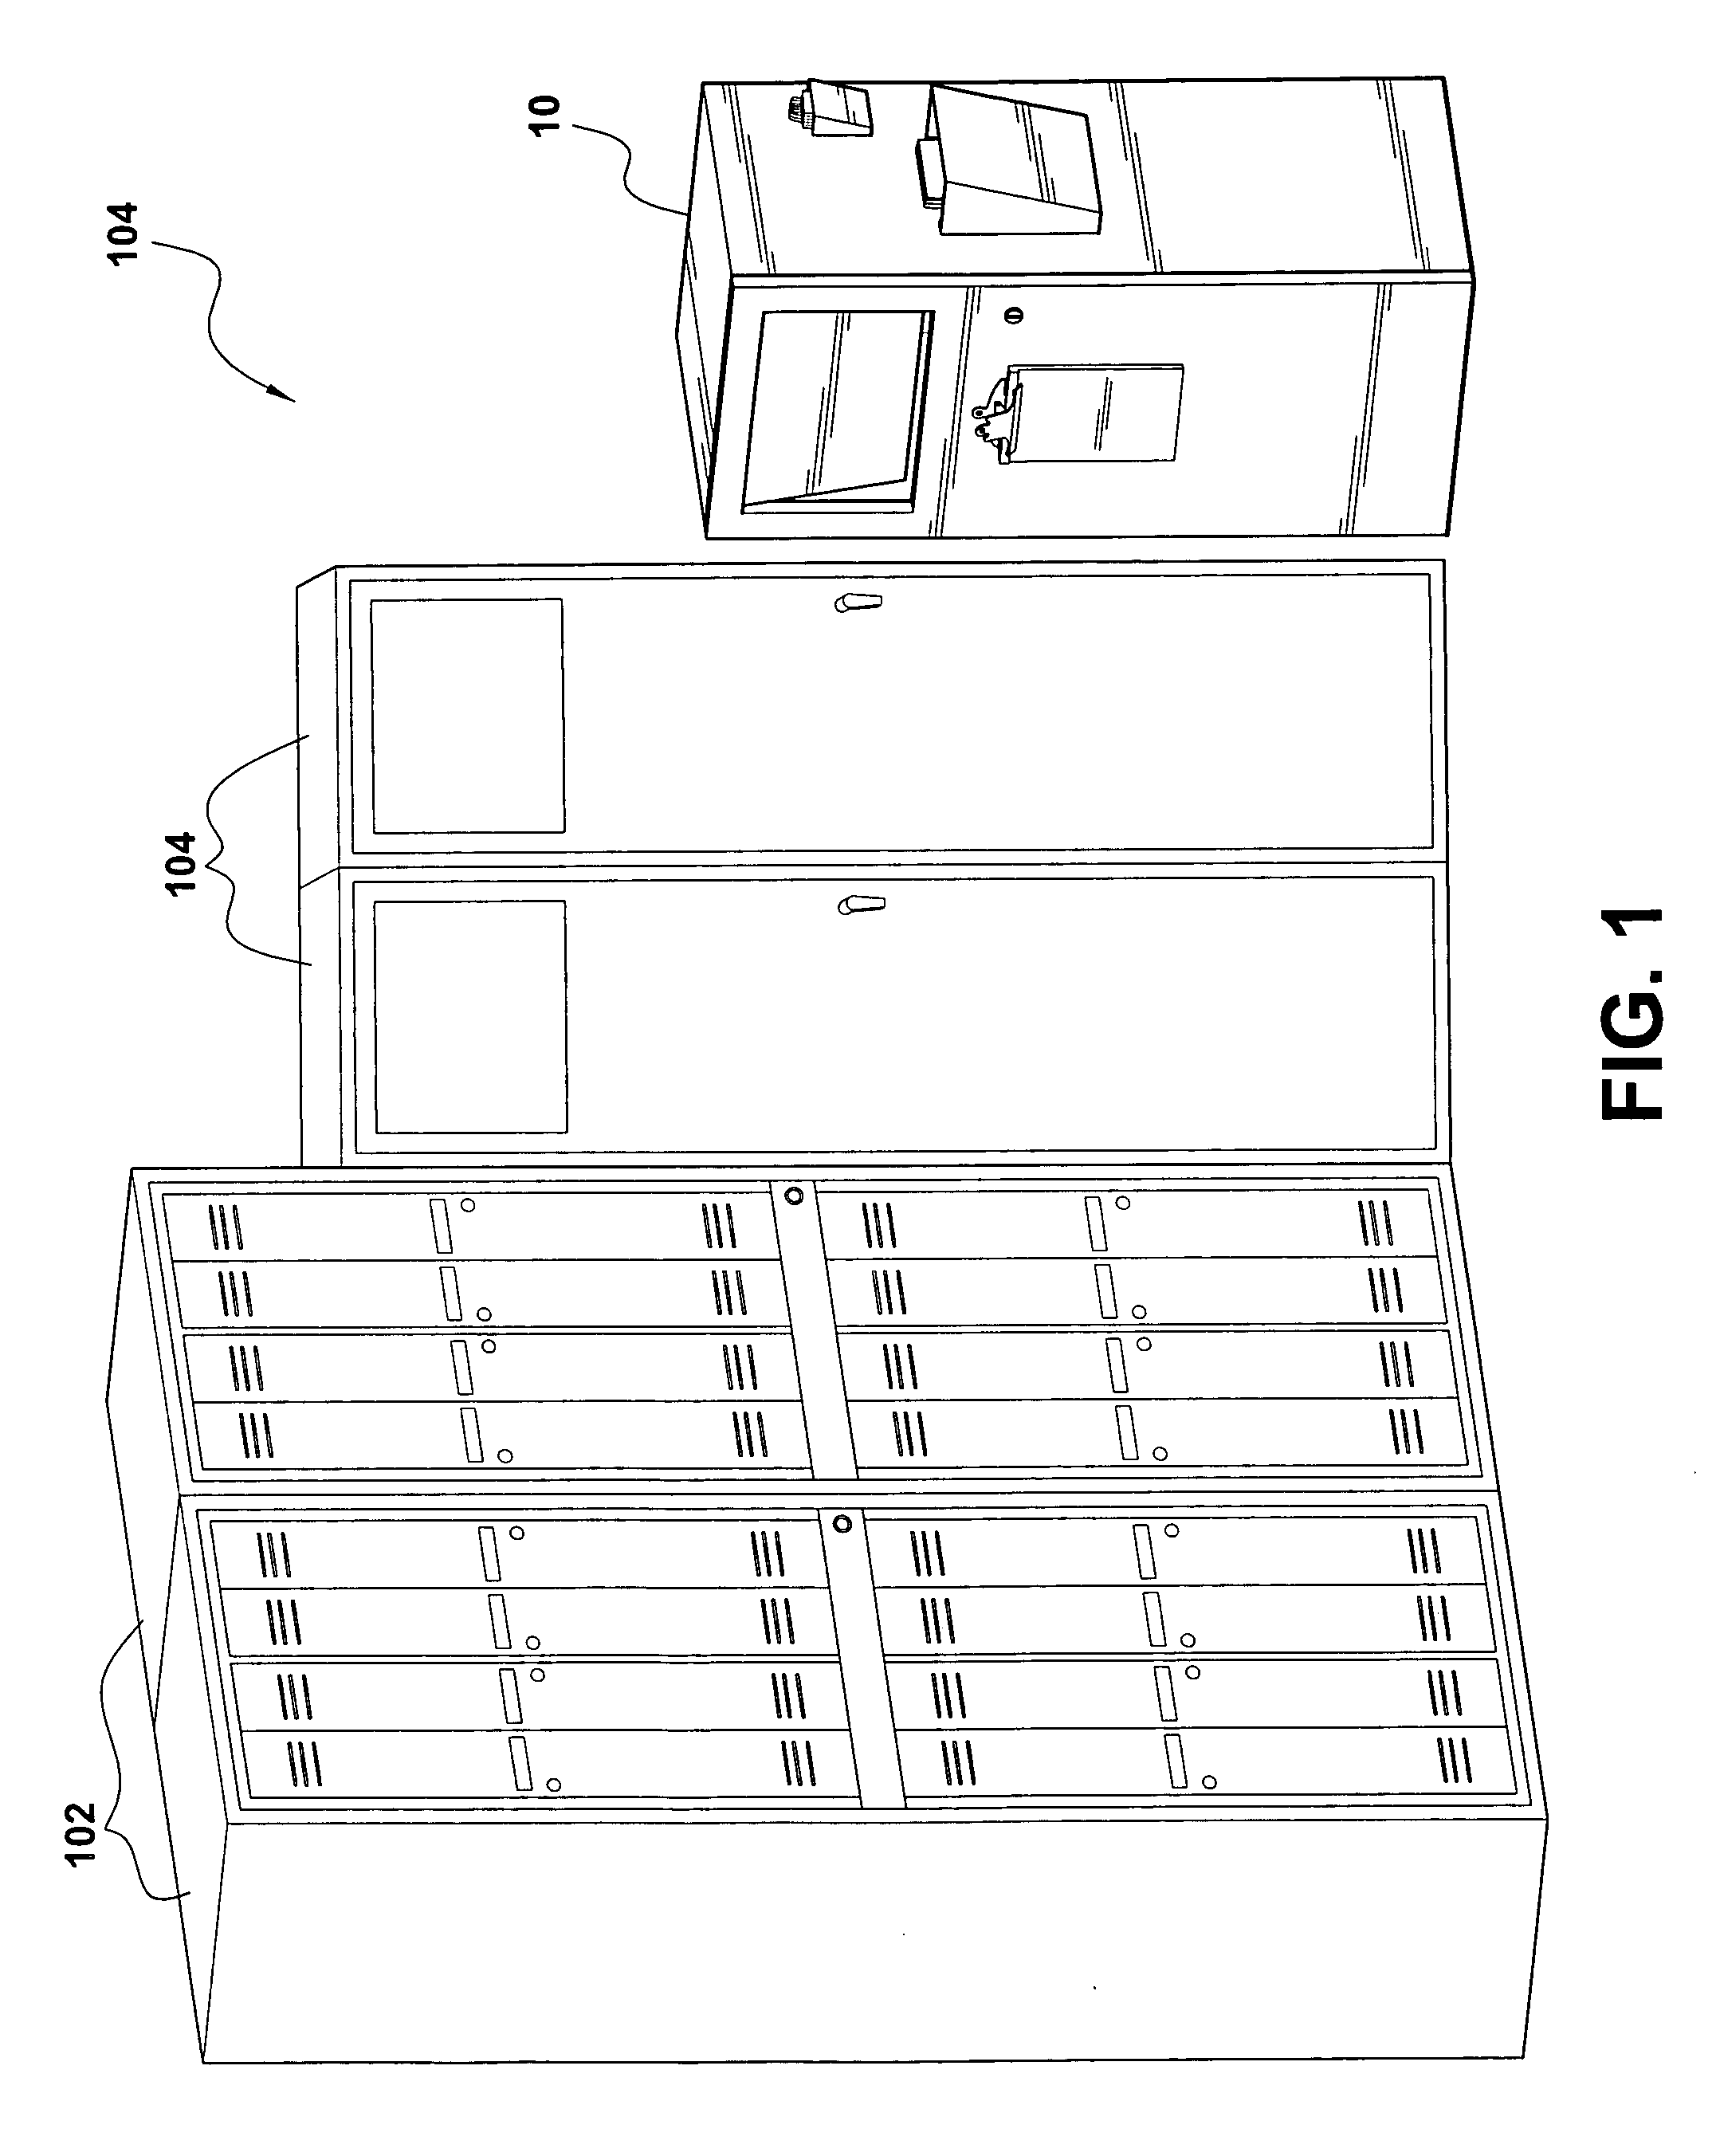 Locker and method for uniform repair and replacement